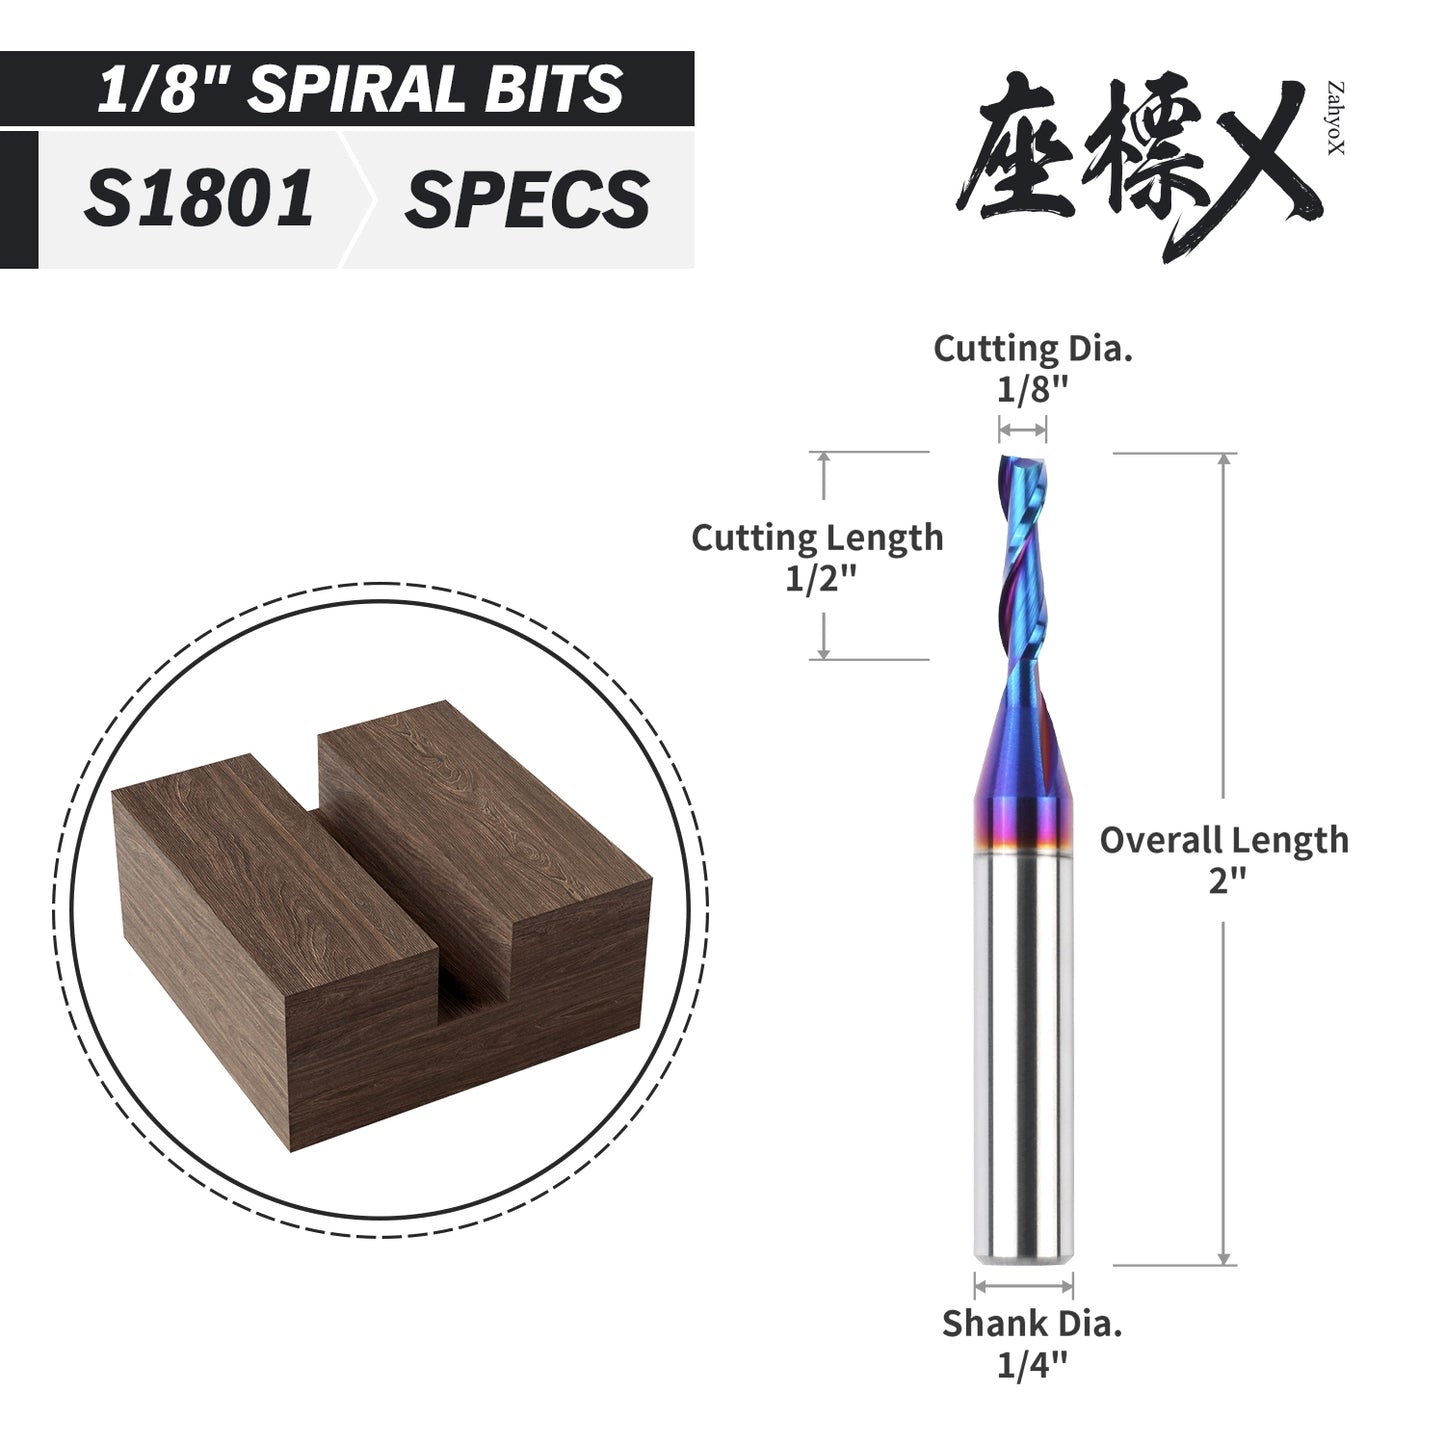 S1801 Solid Carbide nACo Coated Upcut Spiral Router Bit - 2 Flutes -  1/4 SD - 1/8 CD - 1/2 CL - 2 OL